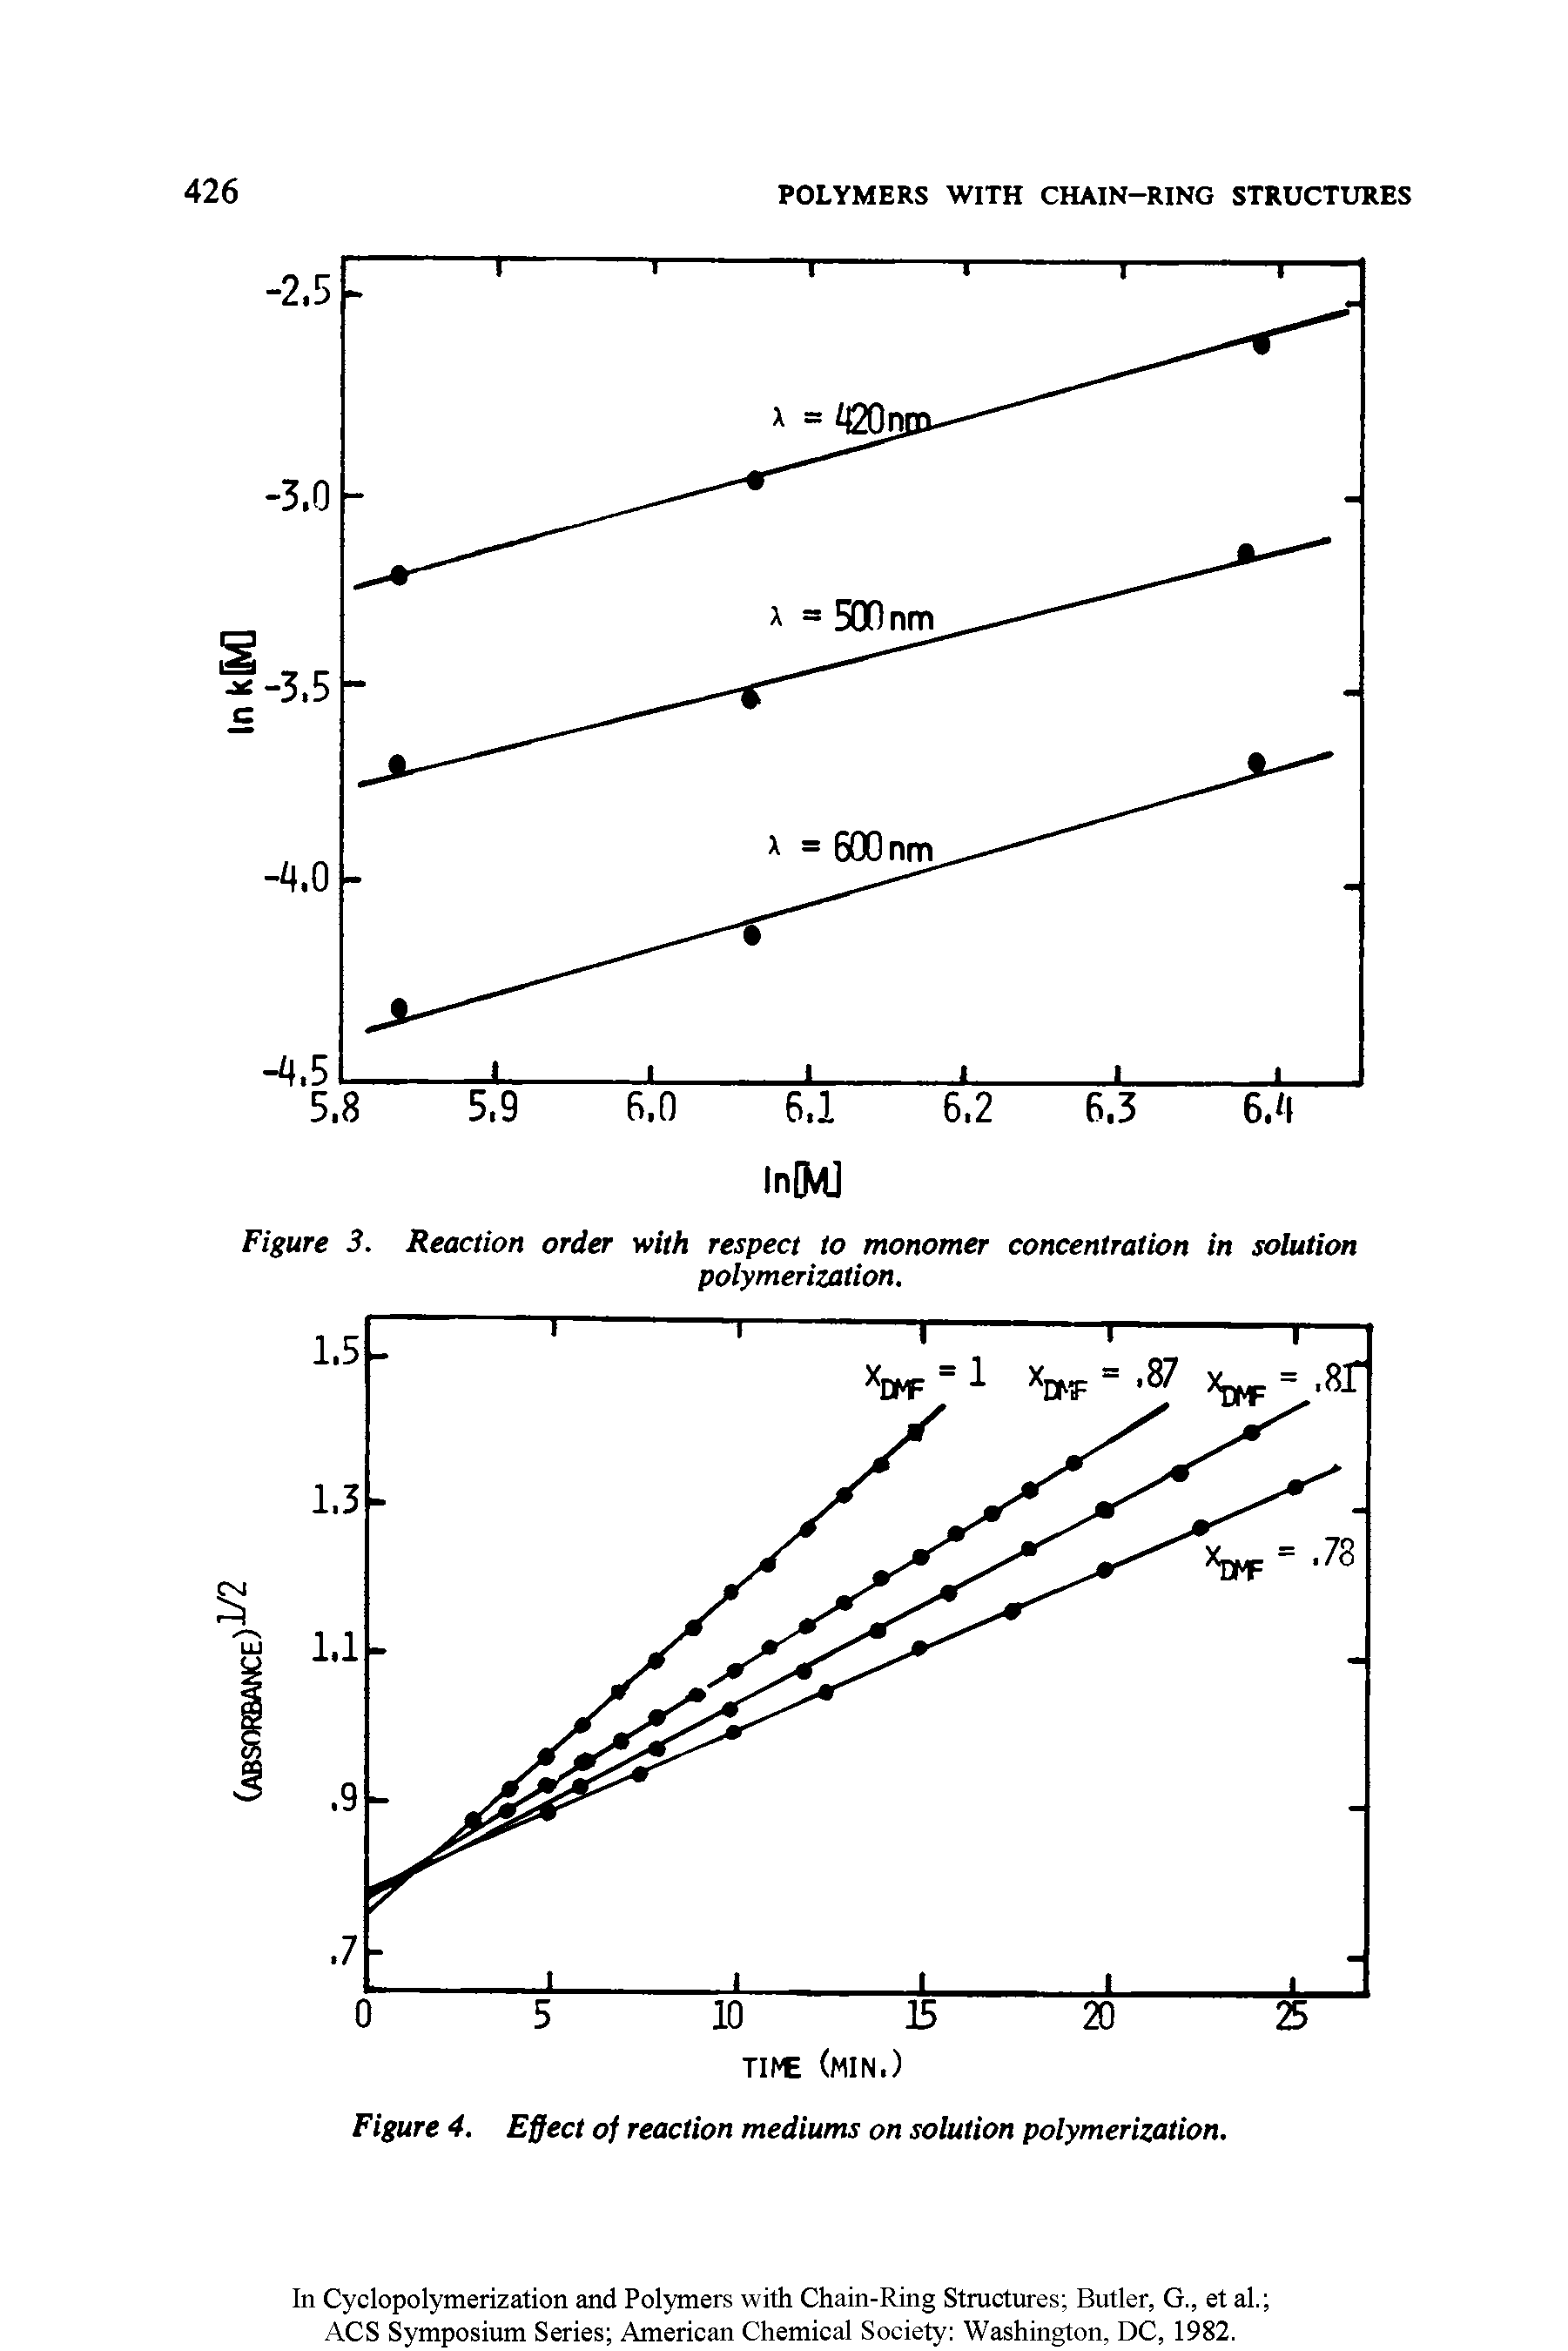 Figure 4. Effect of reaction mediums on solution polymerization.